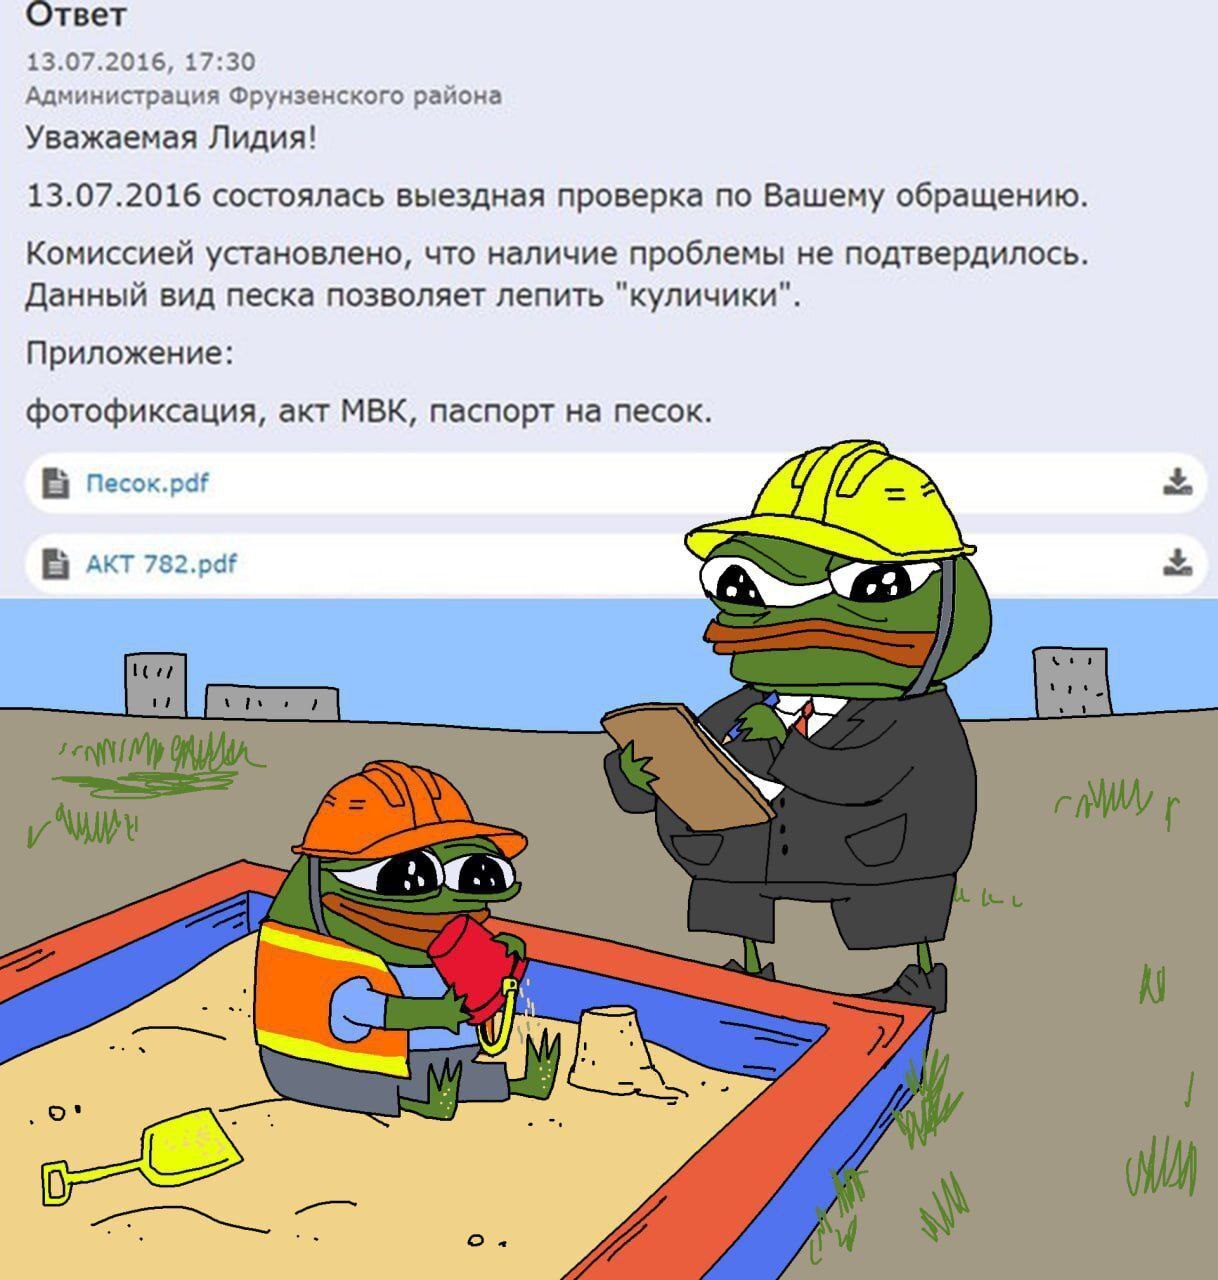 The commission conducted an inspection - Humor, Picture with text, Pepe, Sand, Sandbox, Kulich, Лепка